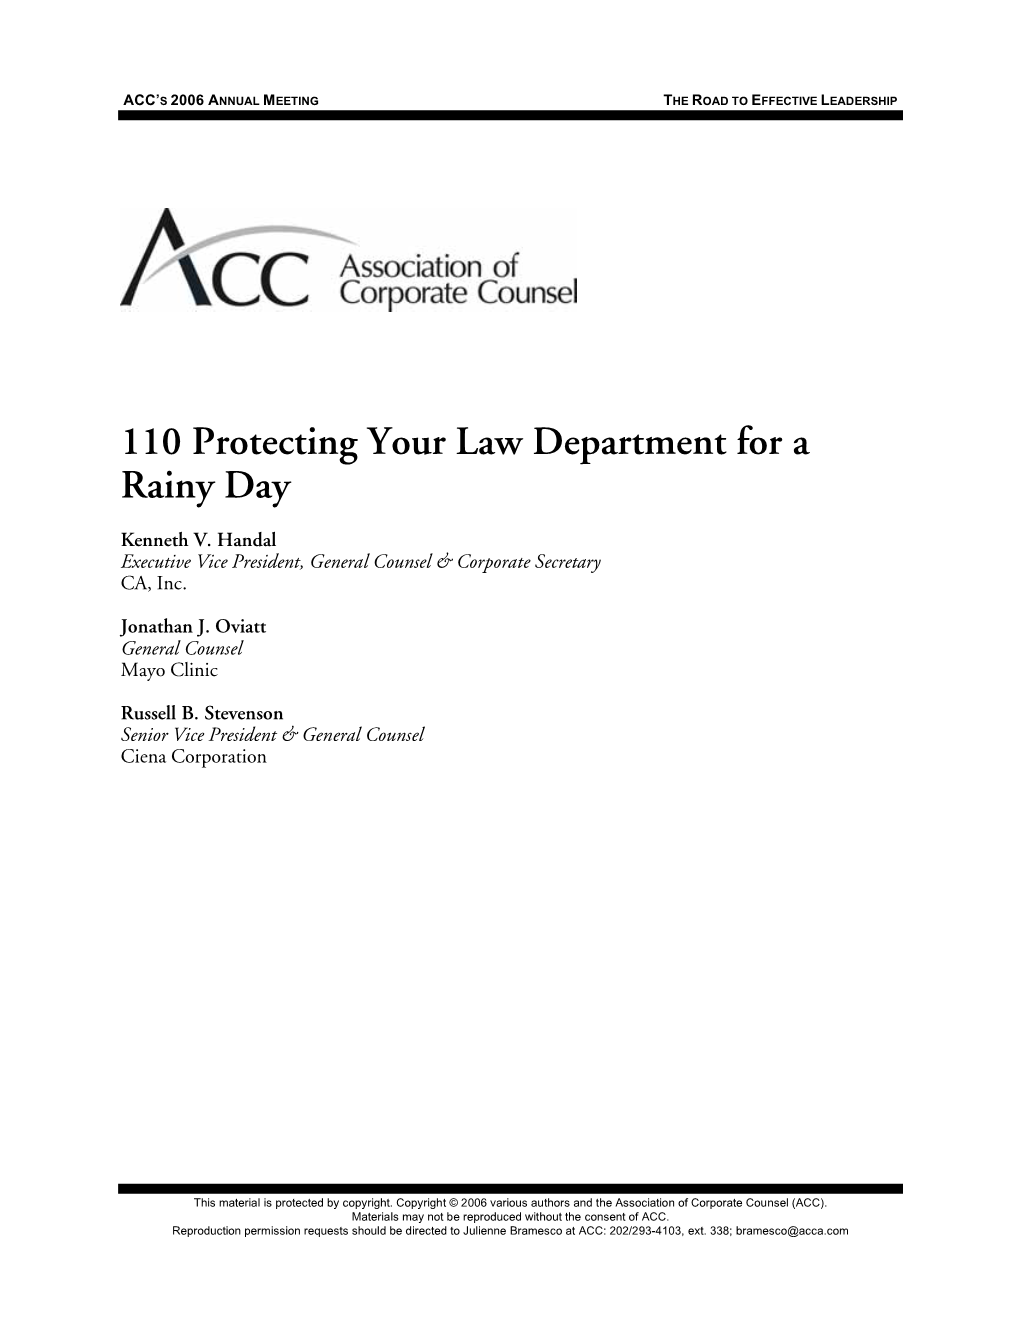 110 Protecting Your Law Department for a Rainy Day